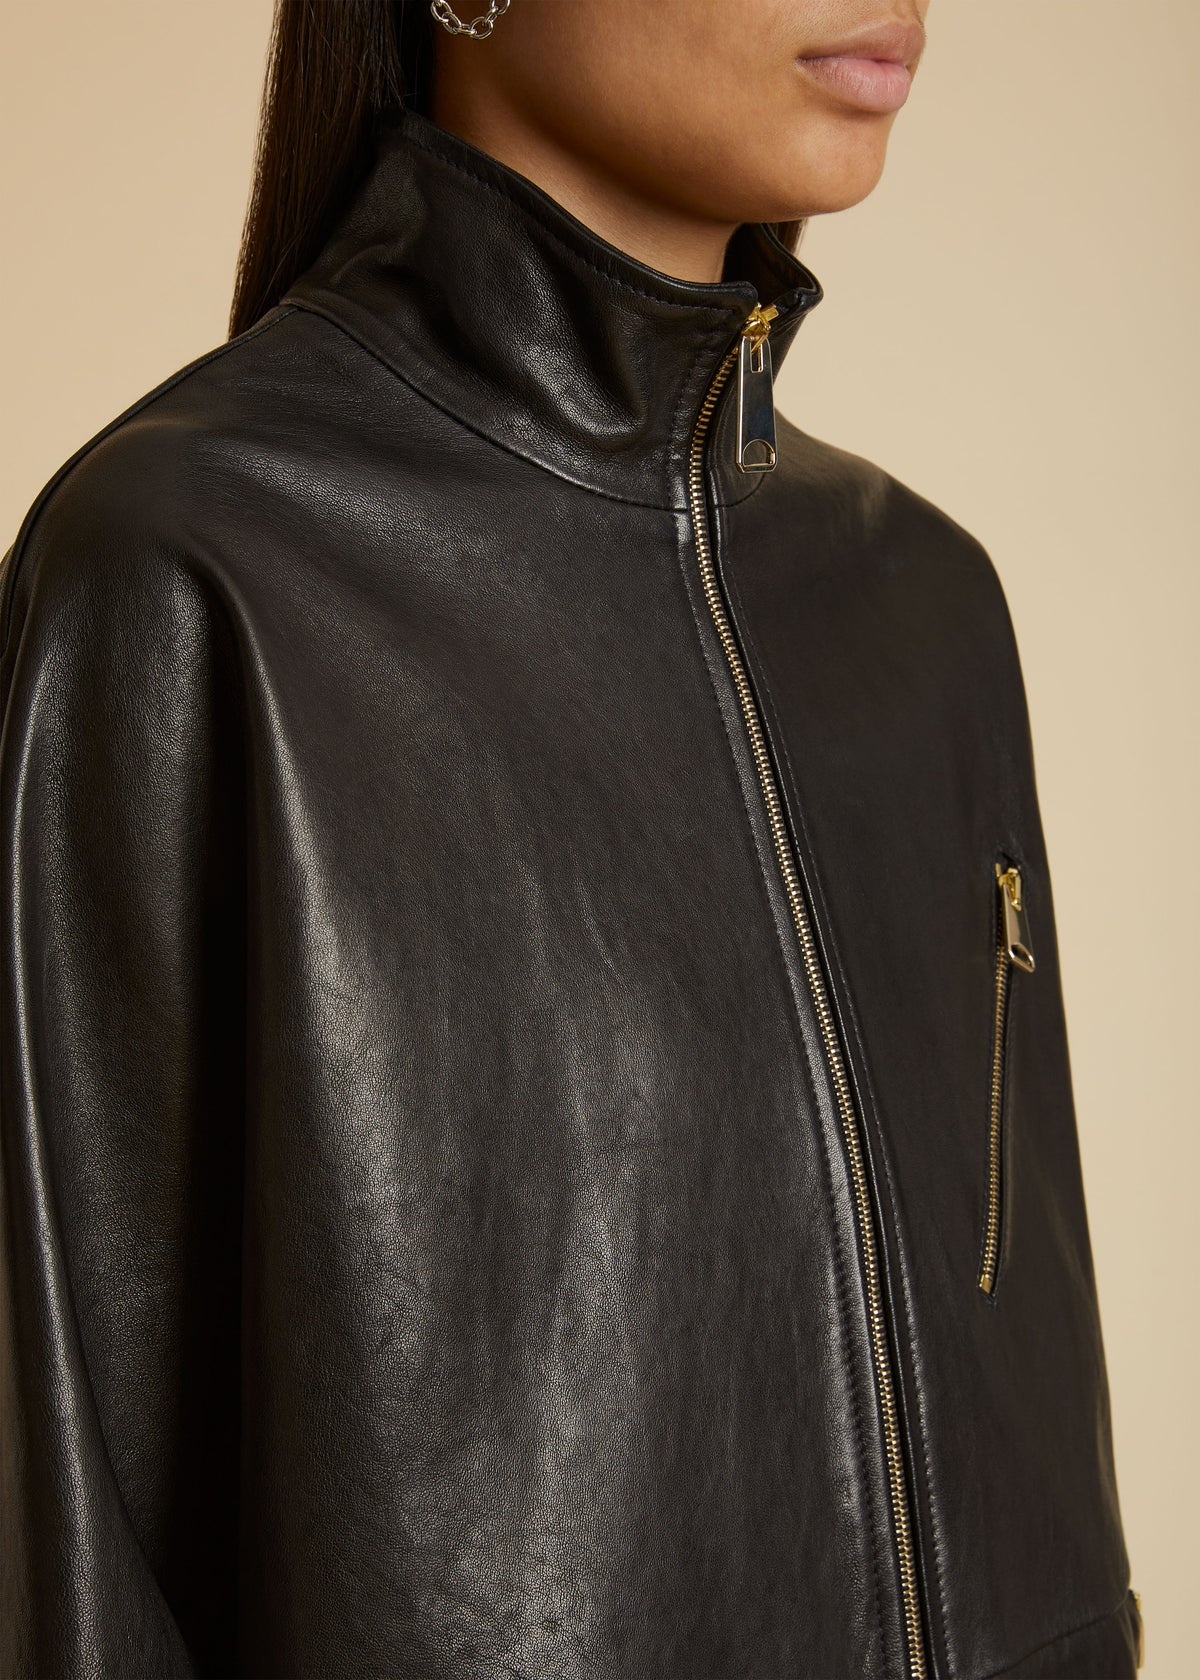 The Shallin Jacket in Black Leather - 5